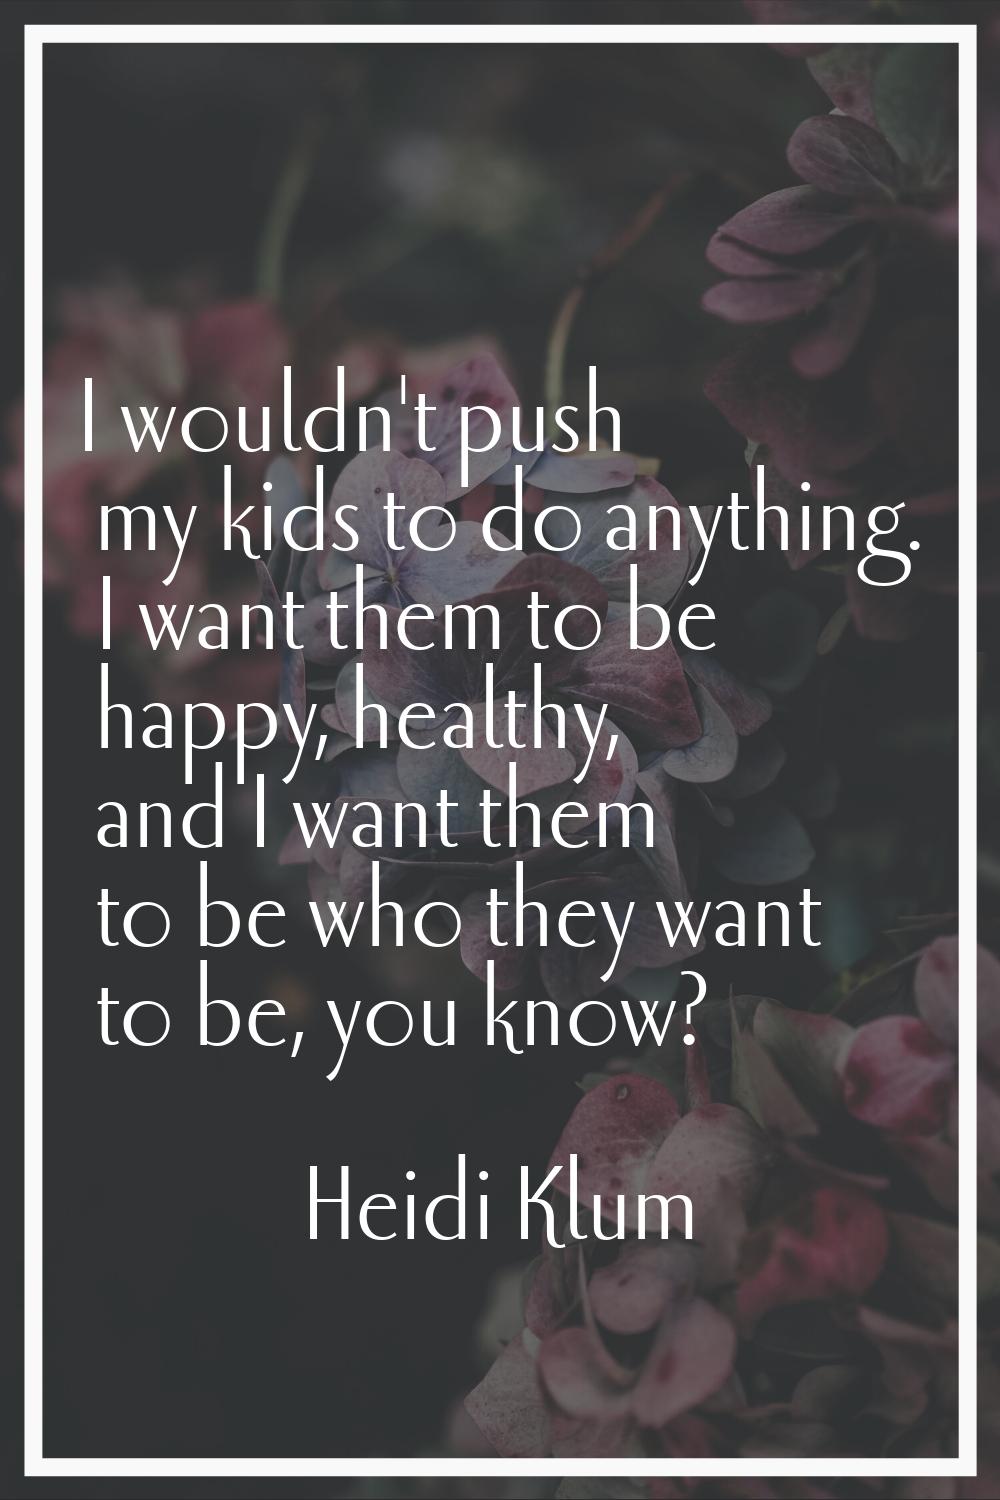 I wouldn't push my kids to do anything. I want them to be happy, healthy, and I want them to be who